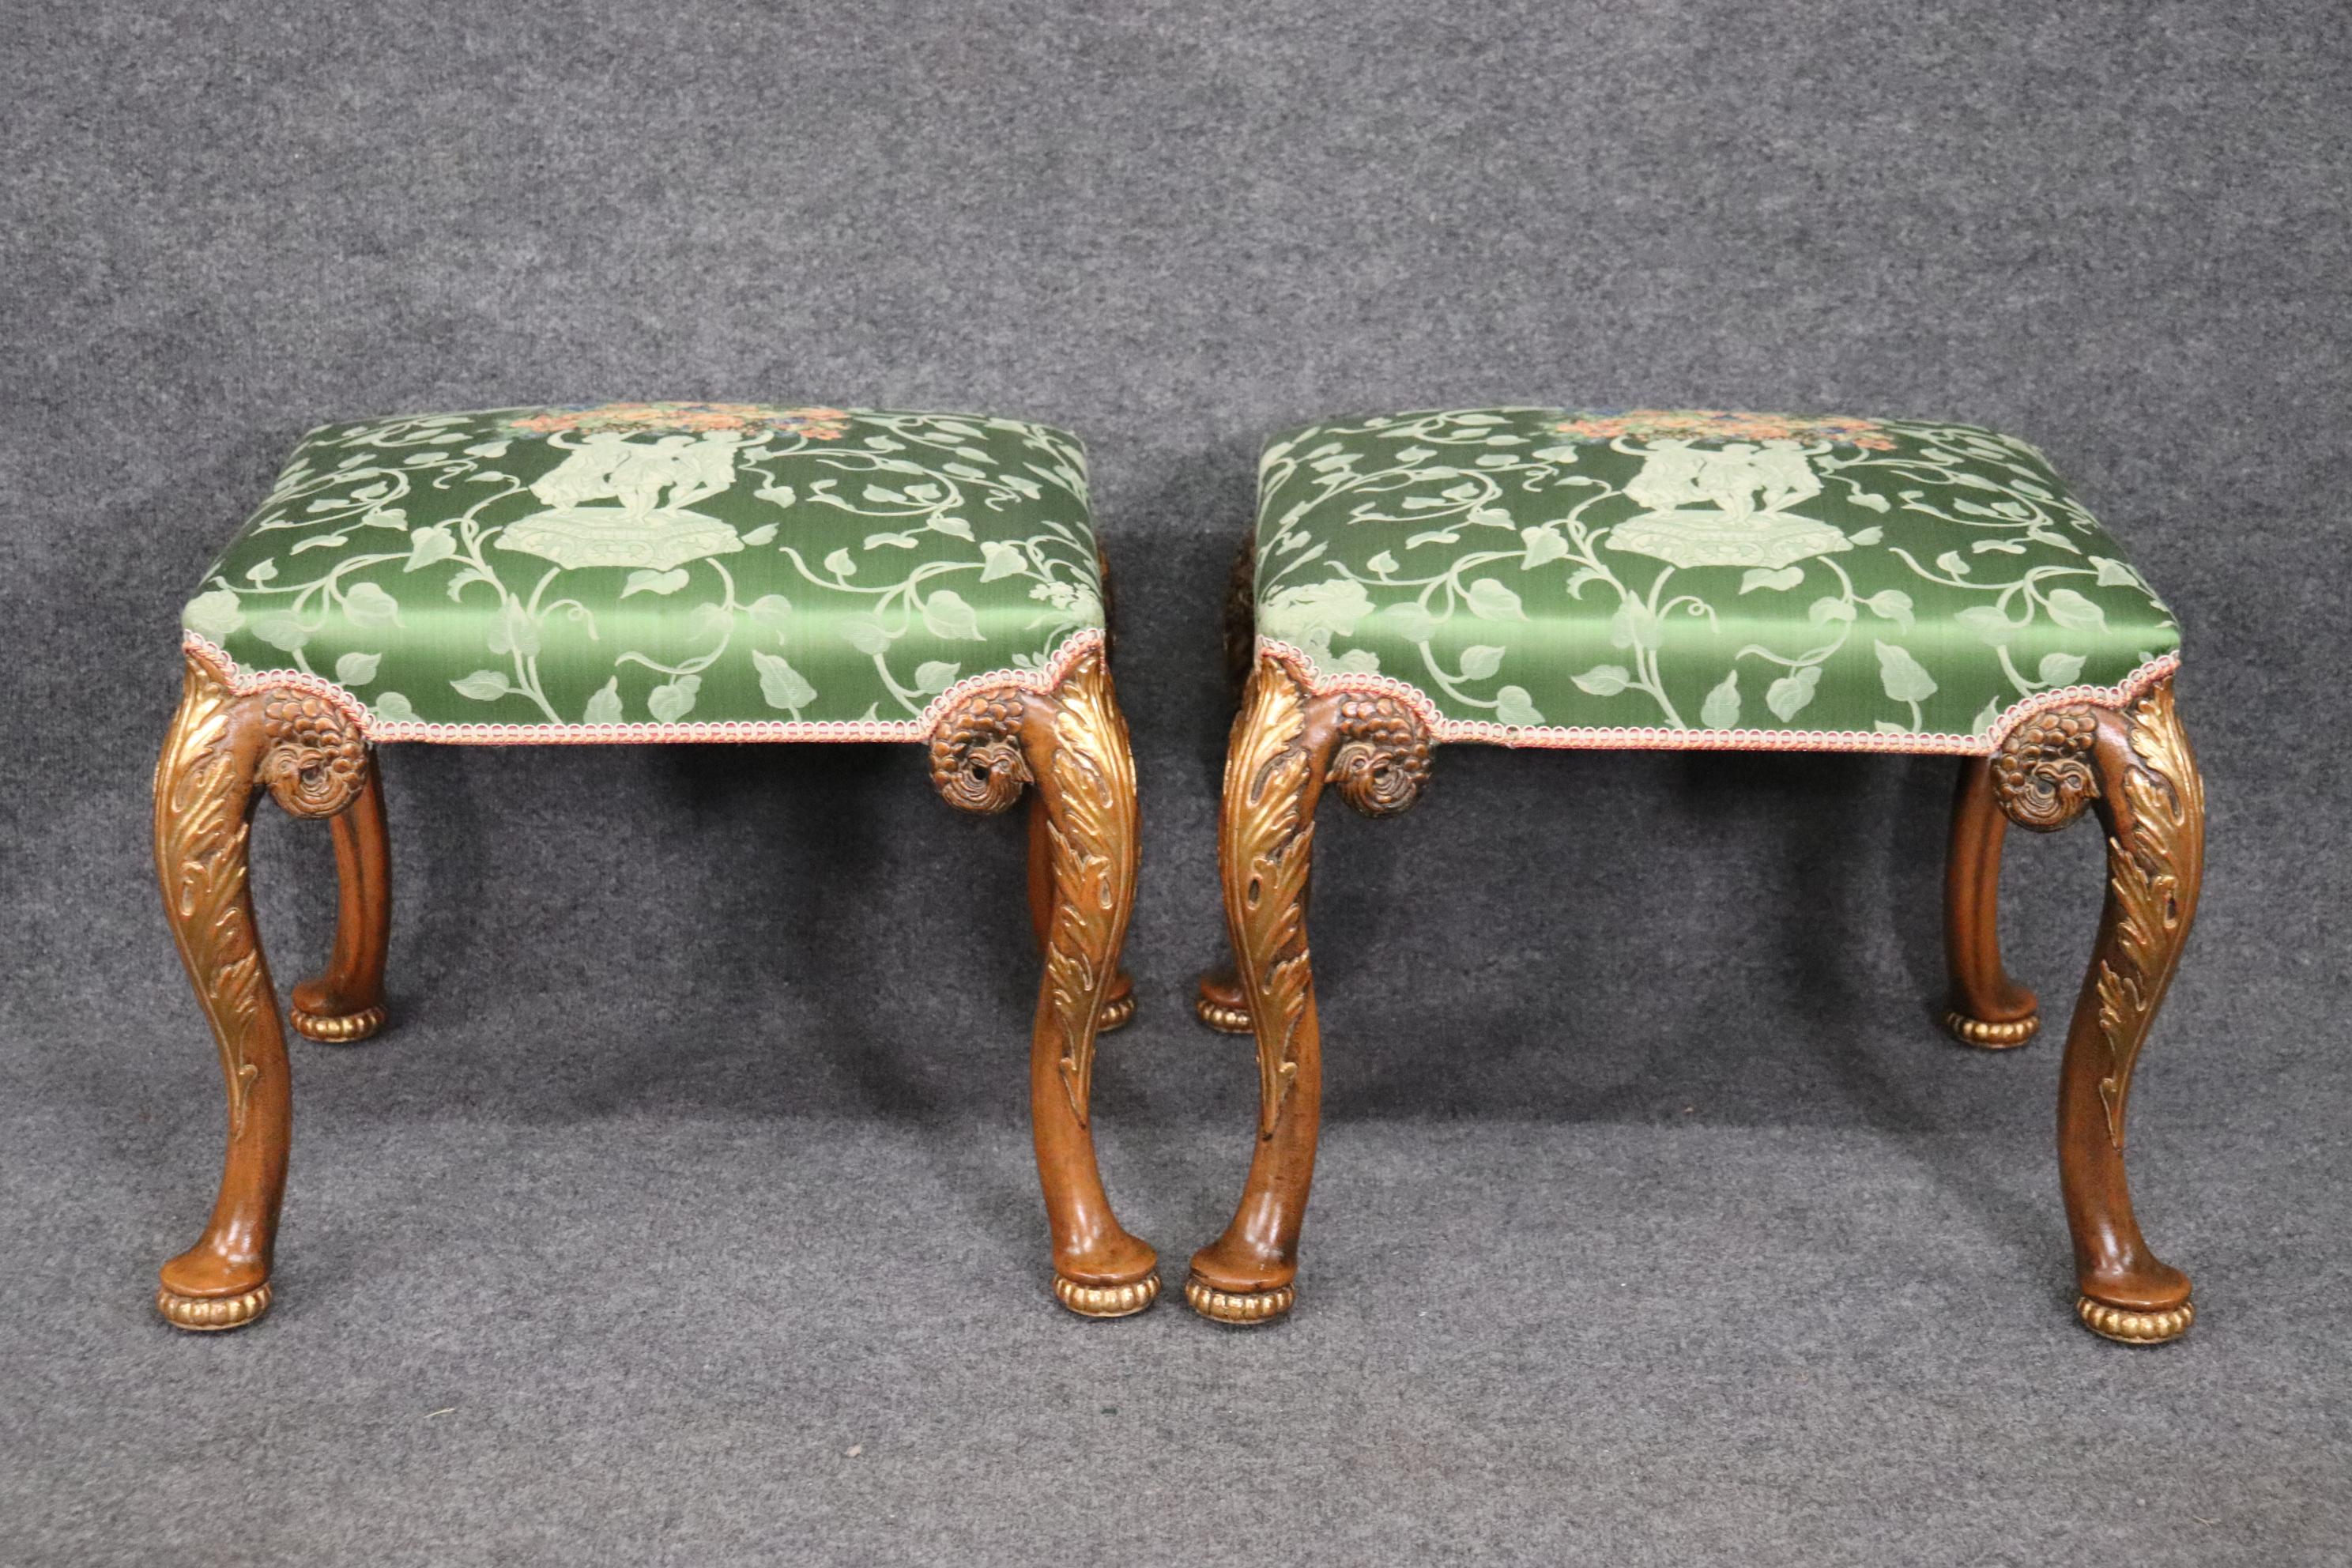 English Carved Walnut Georgian Style Pair of Foot Stools Benches, Circa 1920